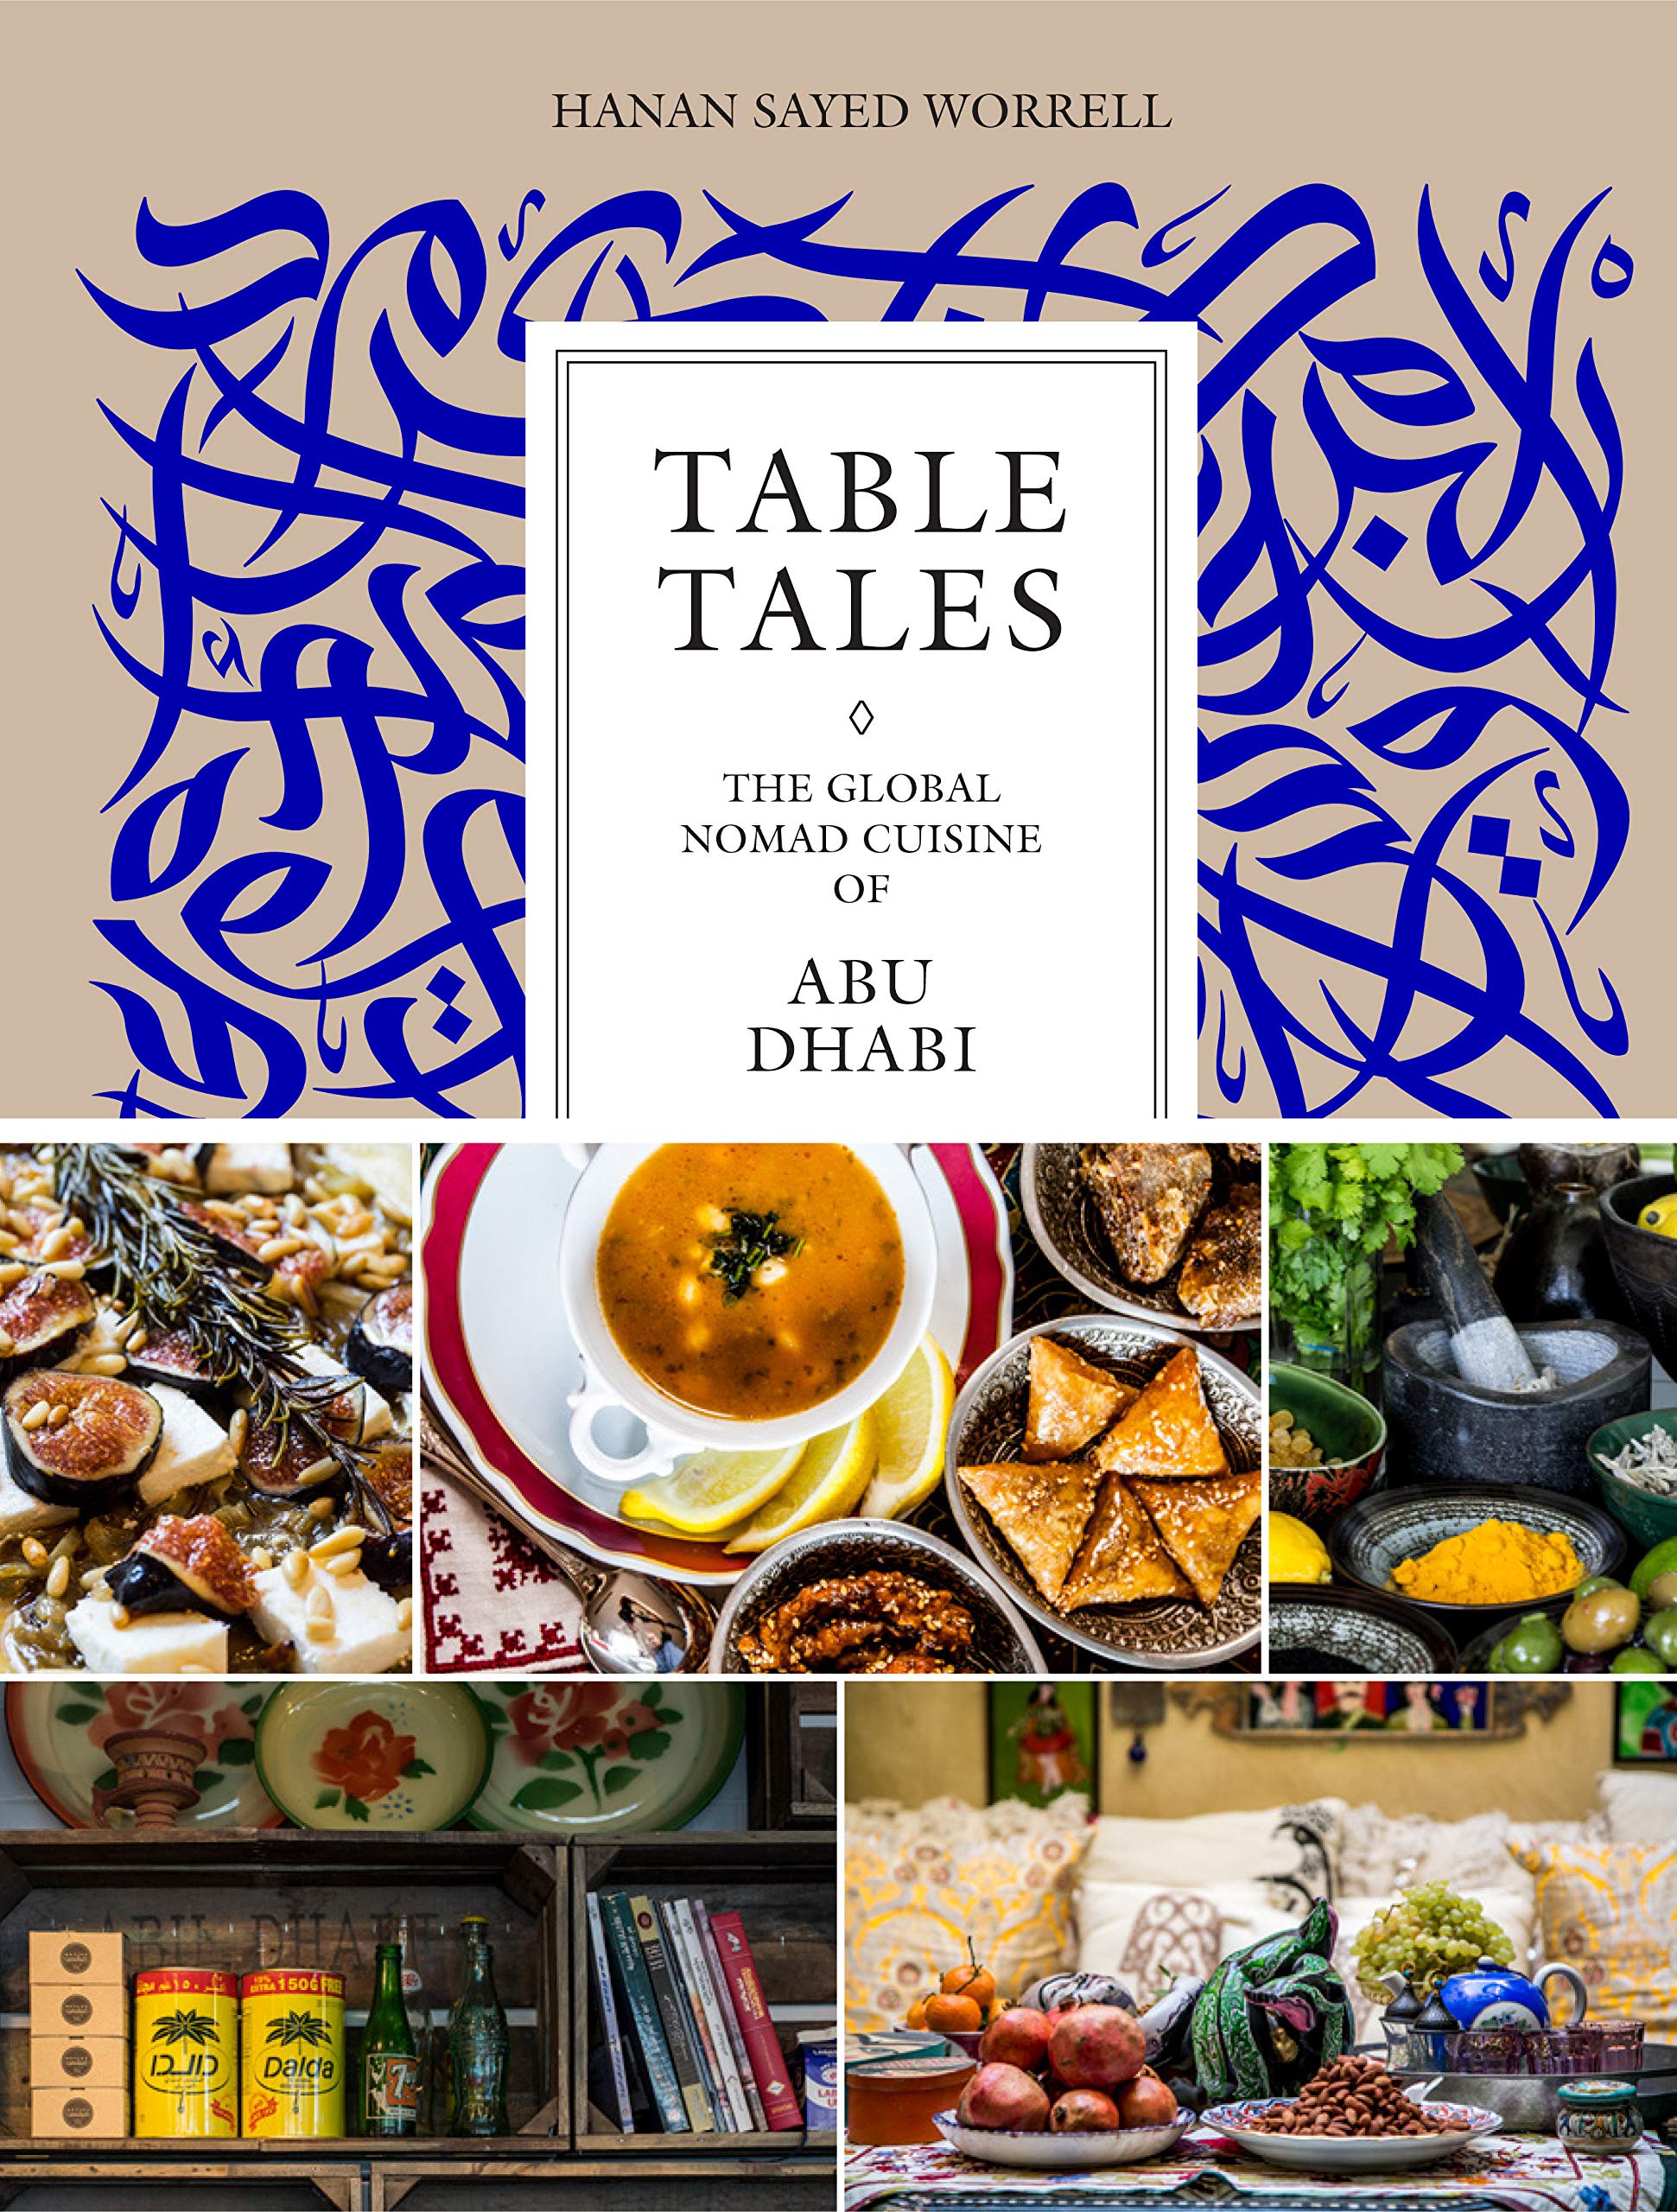 Table Tales: The Global Nomad Cuisine of Abu Dhabi Hardcover – October 23, 2018